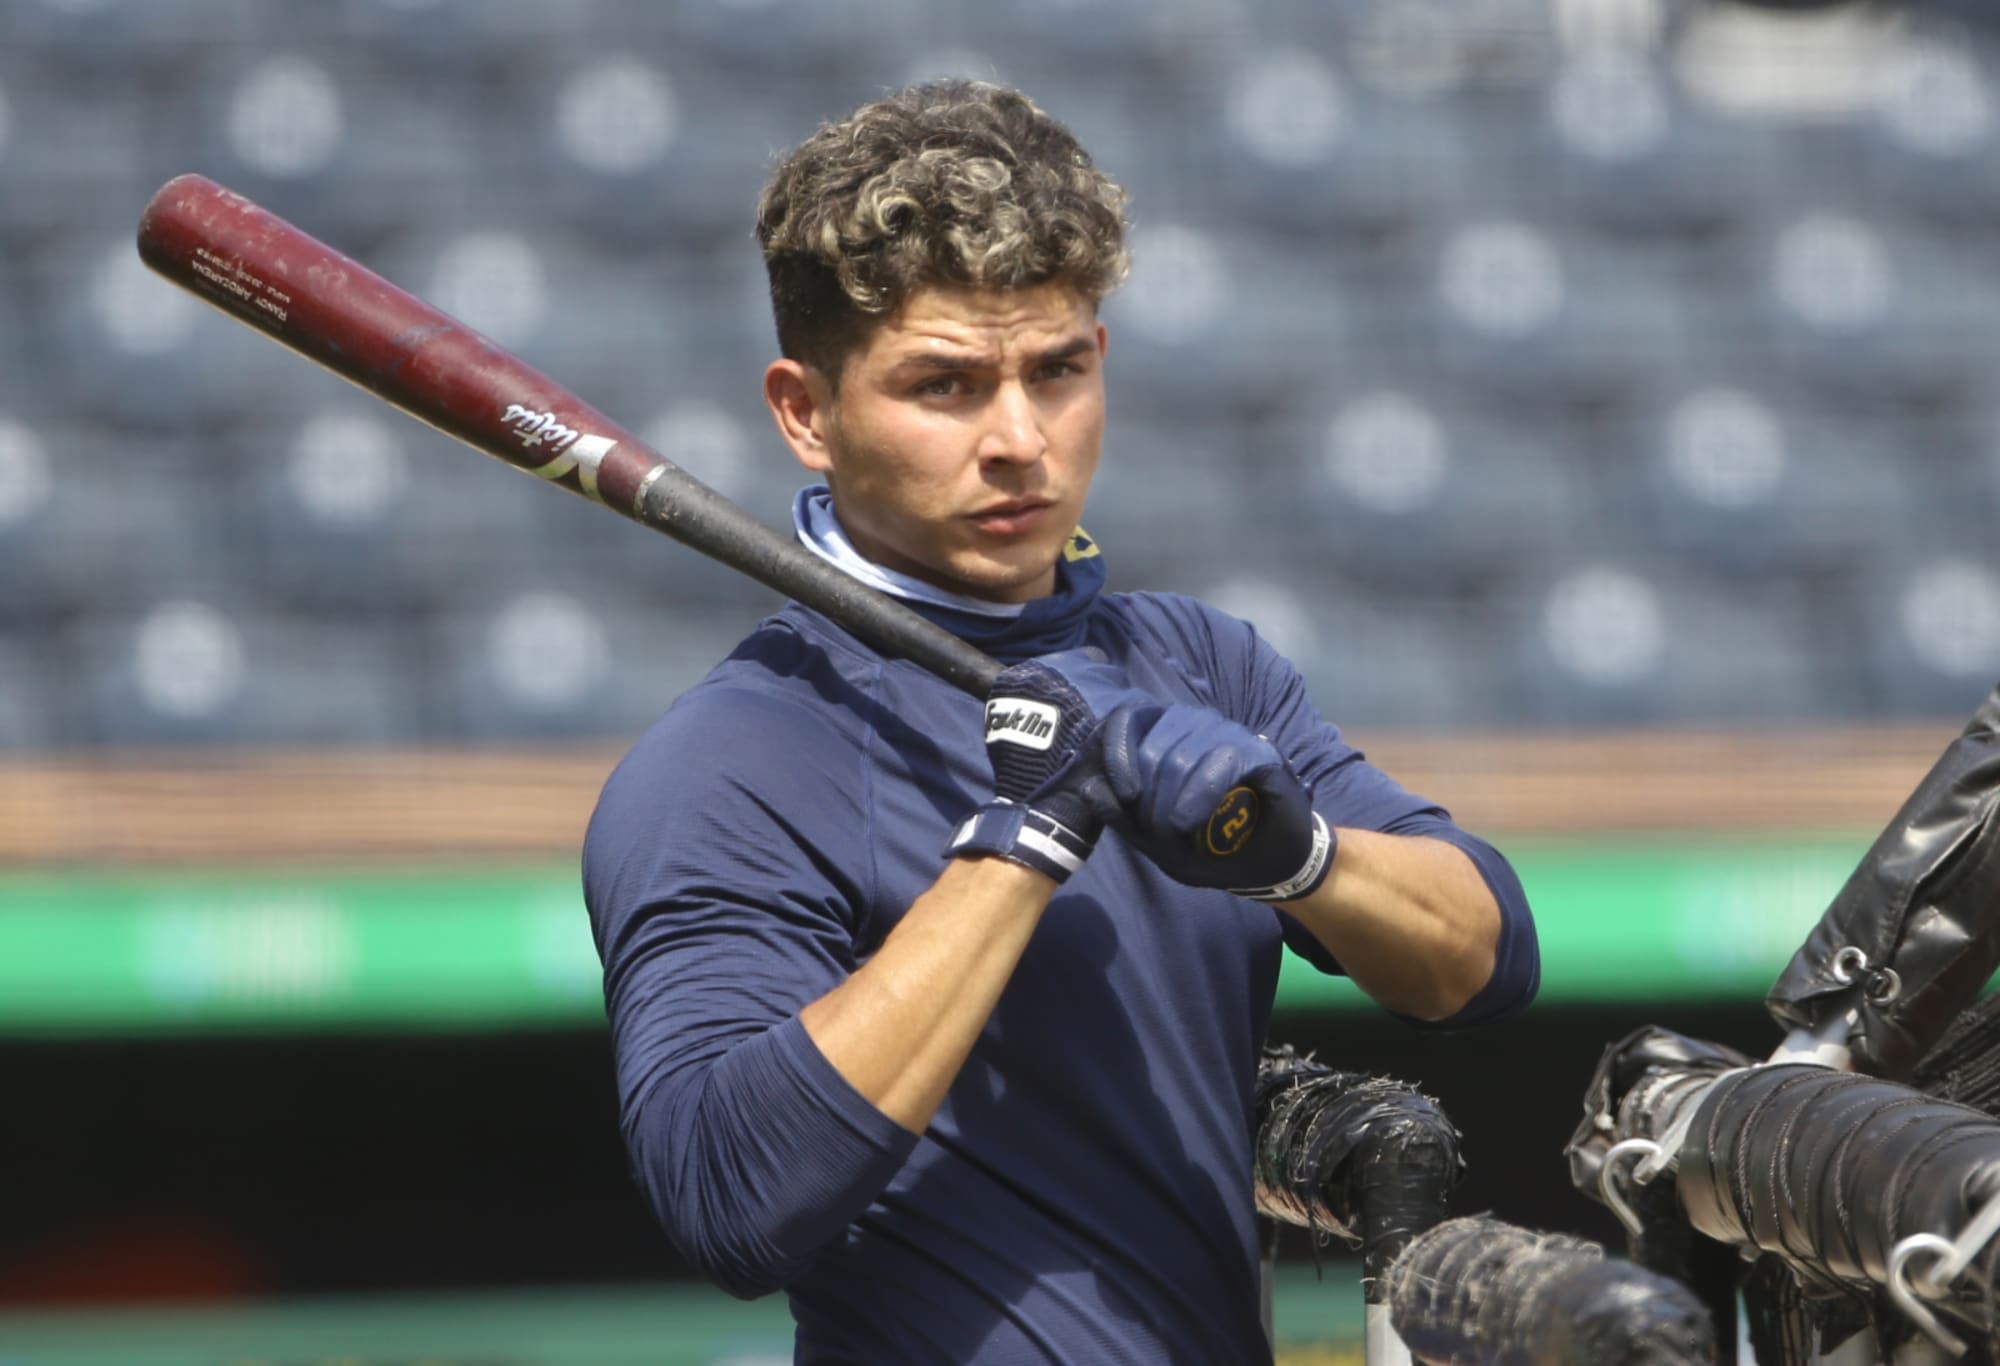 Brewers Is Luis Urias The Third Baseman Of The Future?